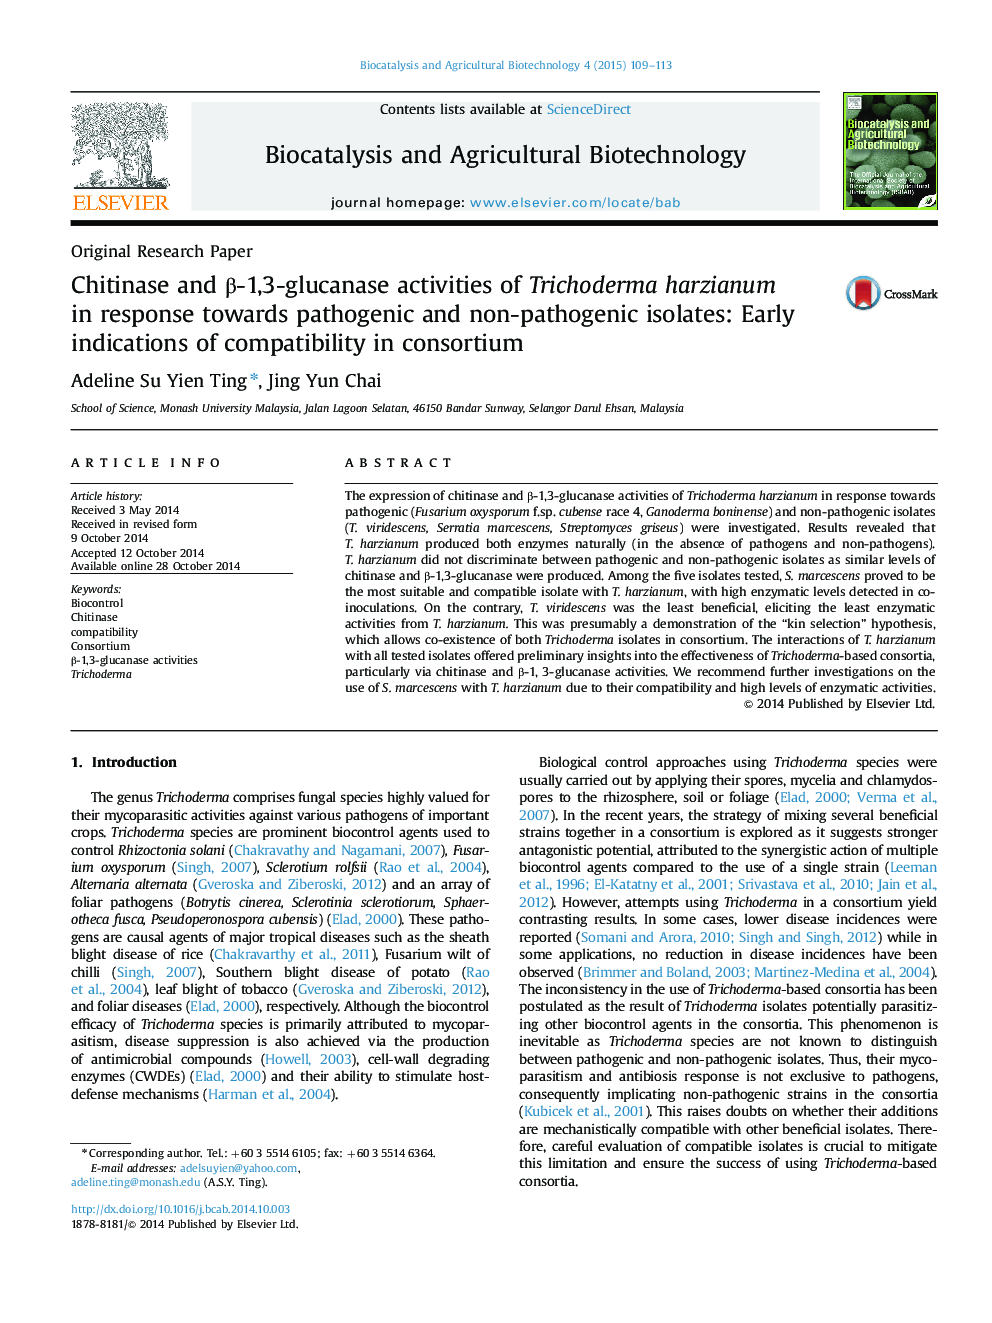 Chitinase and β-1,3-glucanase activities of Trichoderma harzianum in response towards pathogenic and non-pathogenic isolates: Early indications of compatibility in consortium